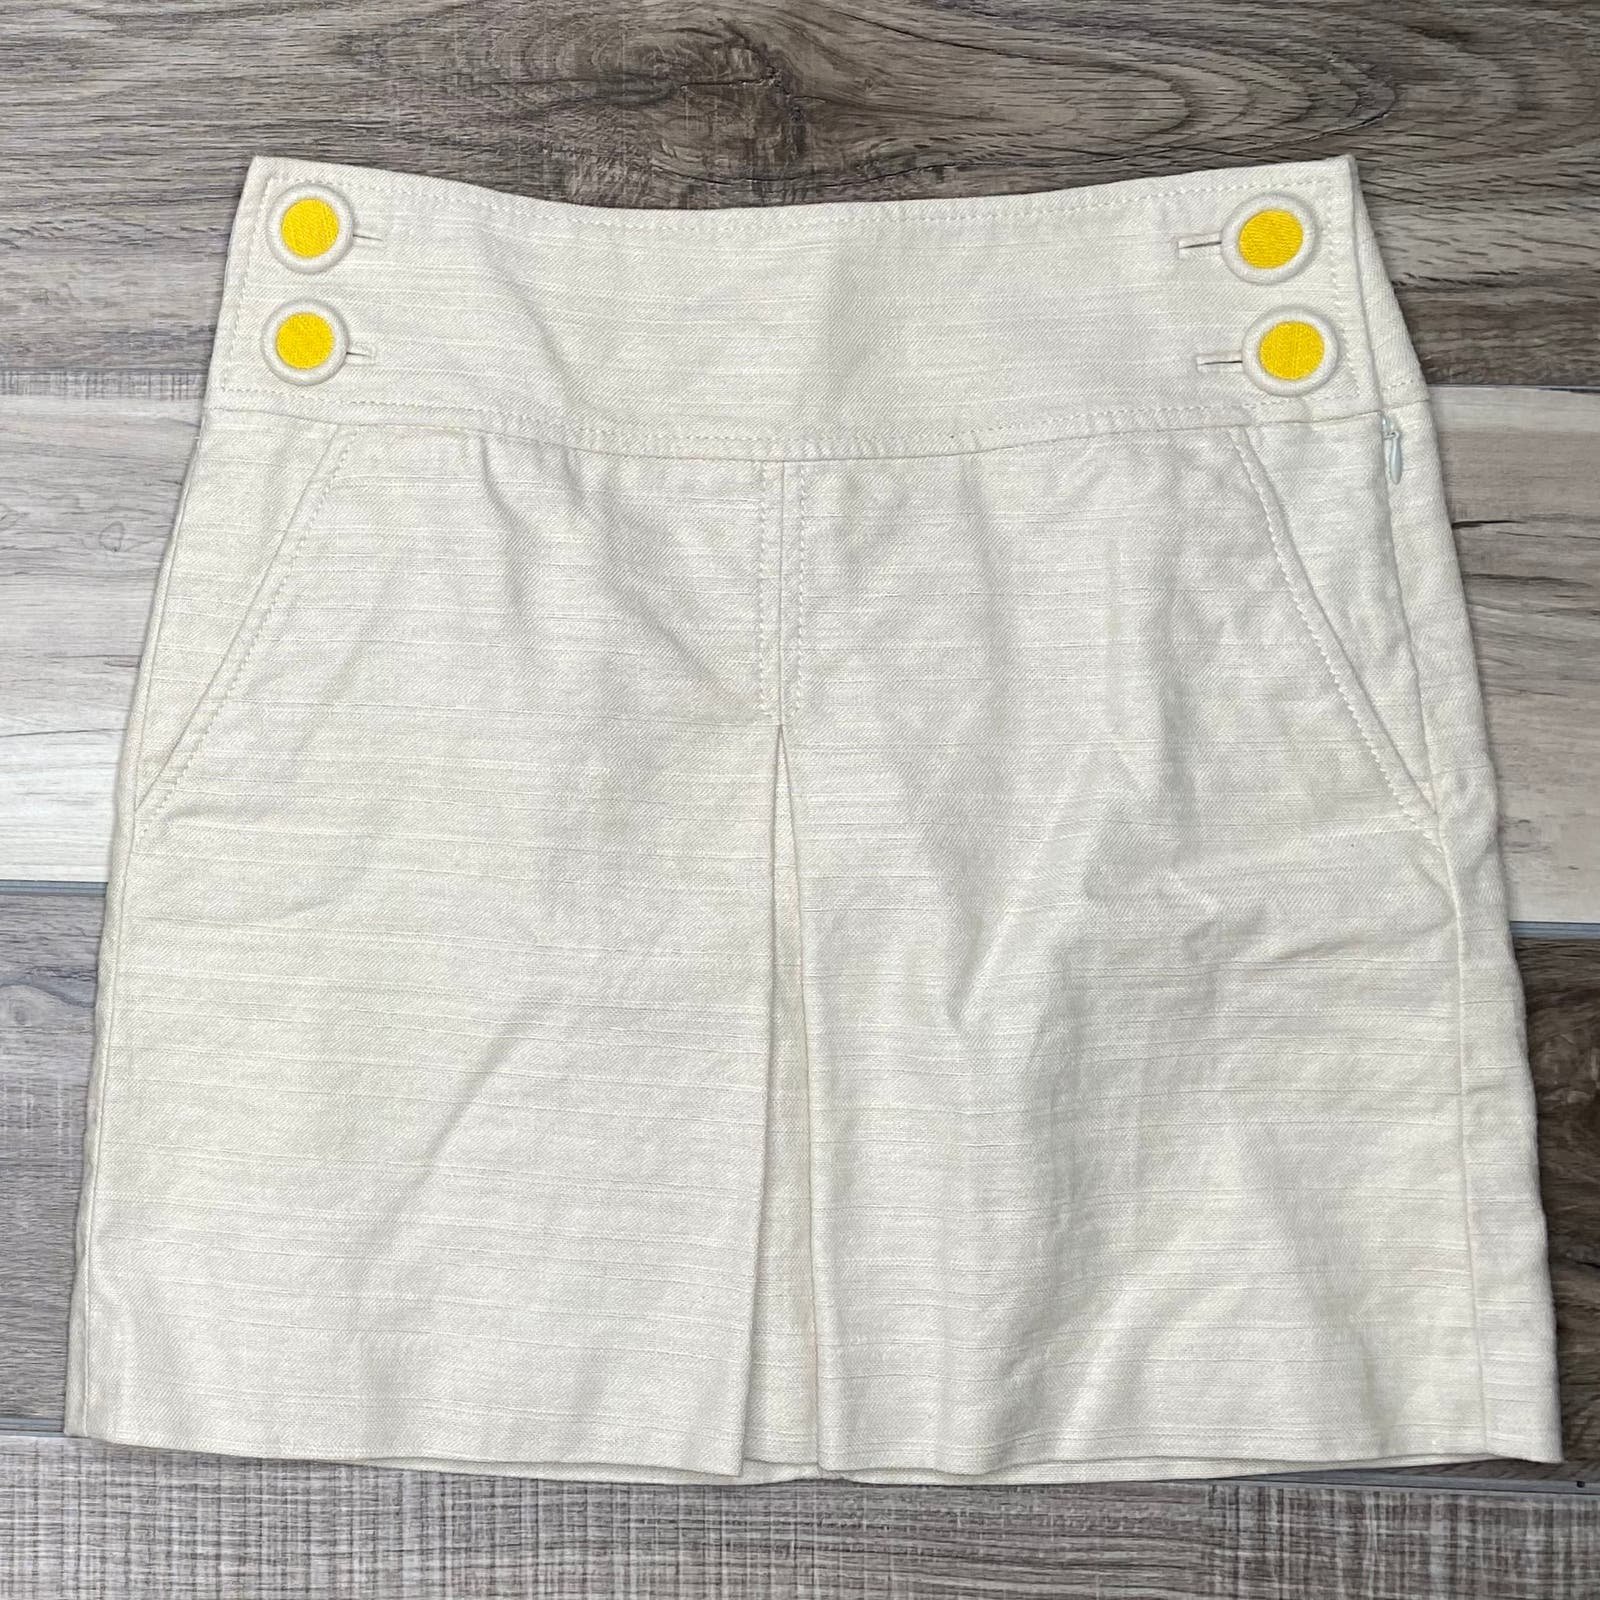 high discount J. Crew Womens 0 Pencil Skirt Side Zip Lined Pockets Cream oQWAhmytu Buying Cheap